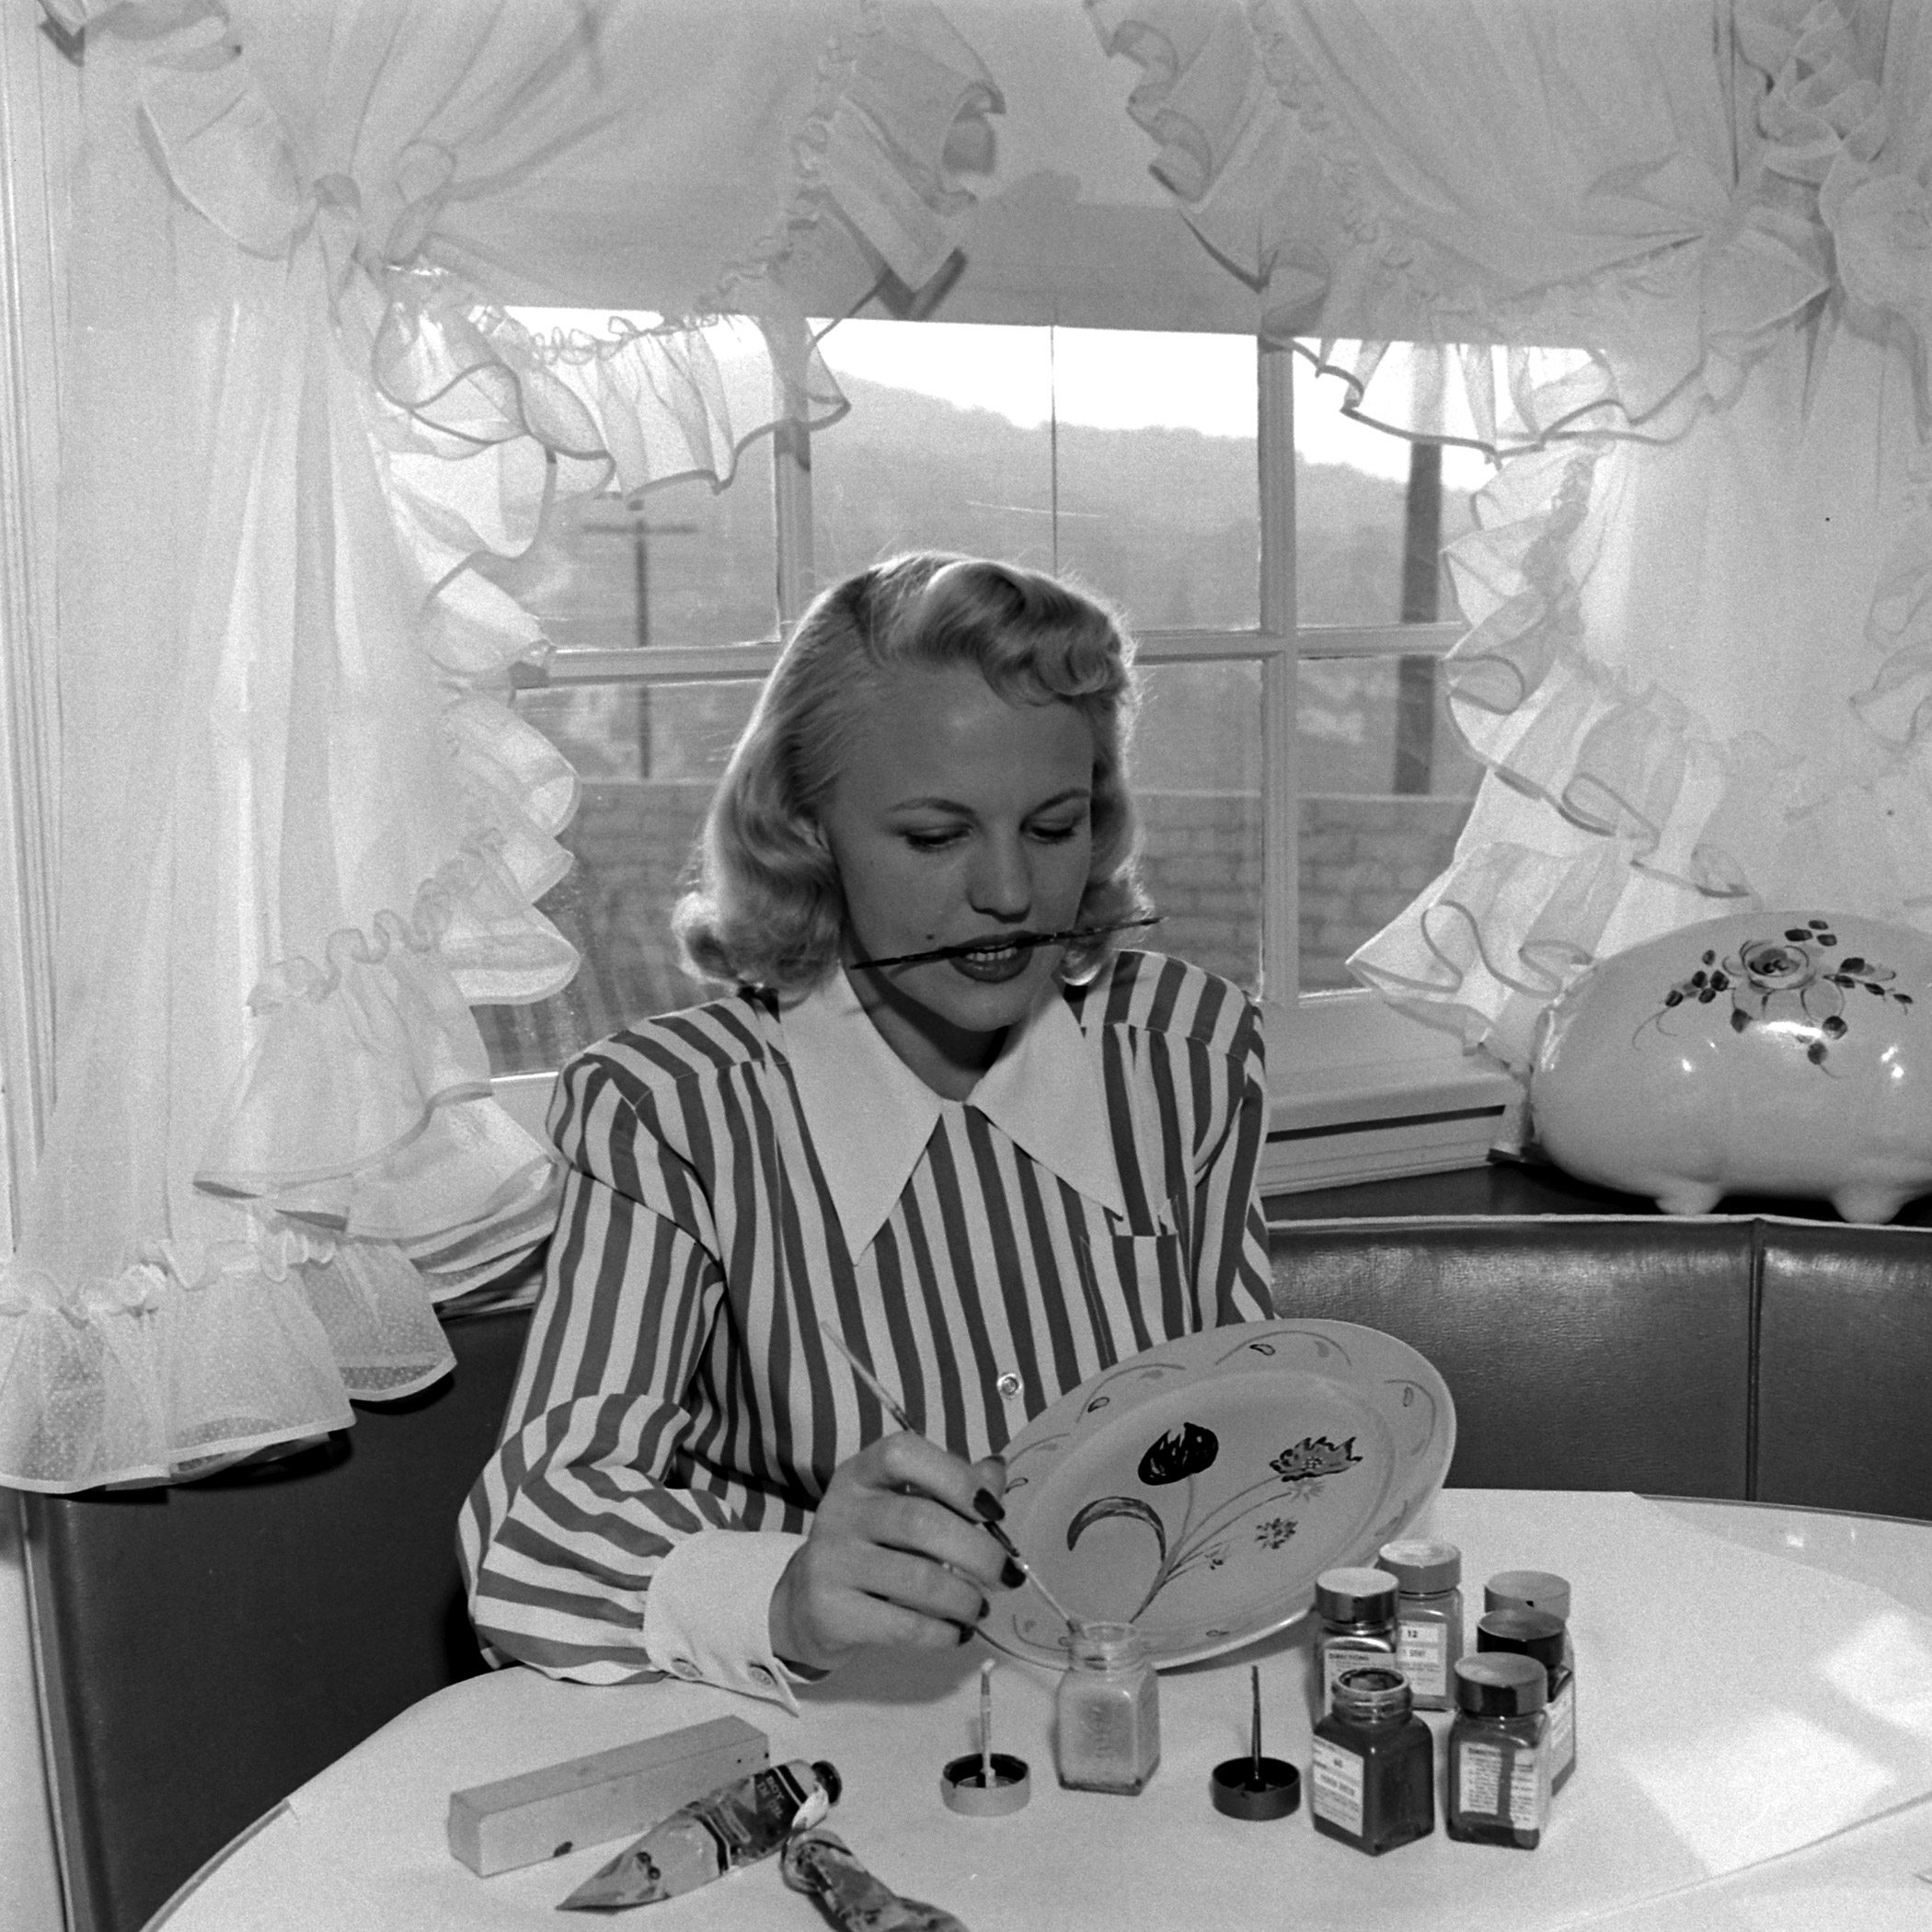 Peggy Lee painting a plate at home in California in 1948.